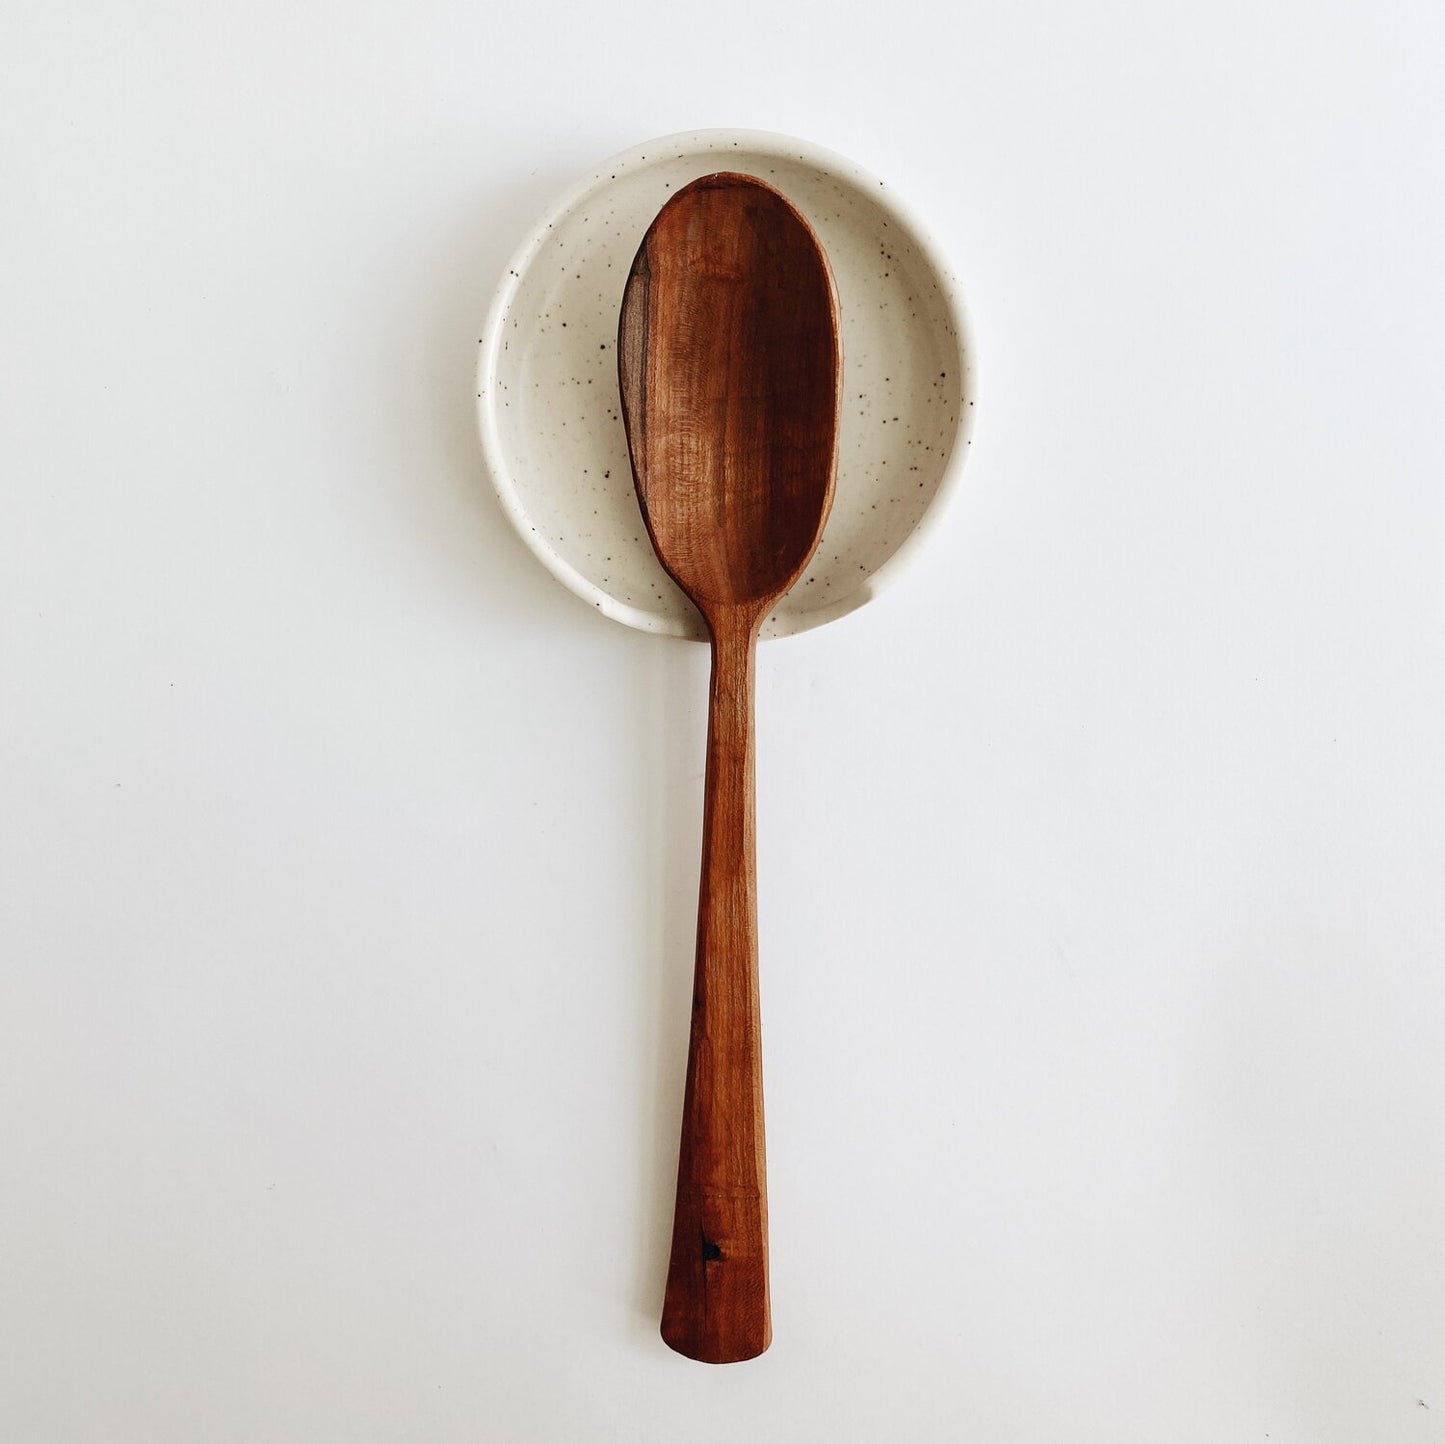 Spoon rest in white speckled glaze with wooden spoon